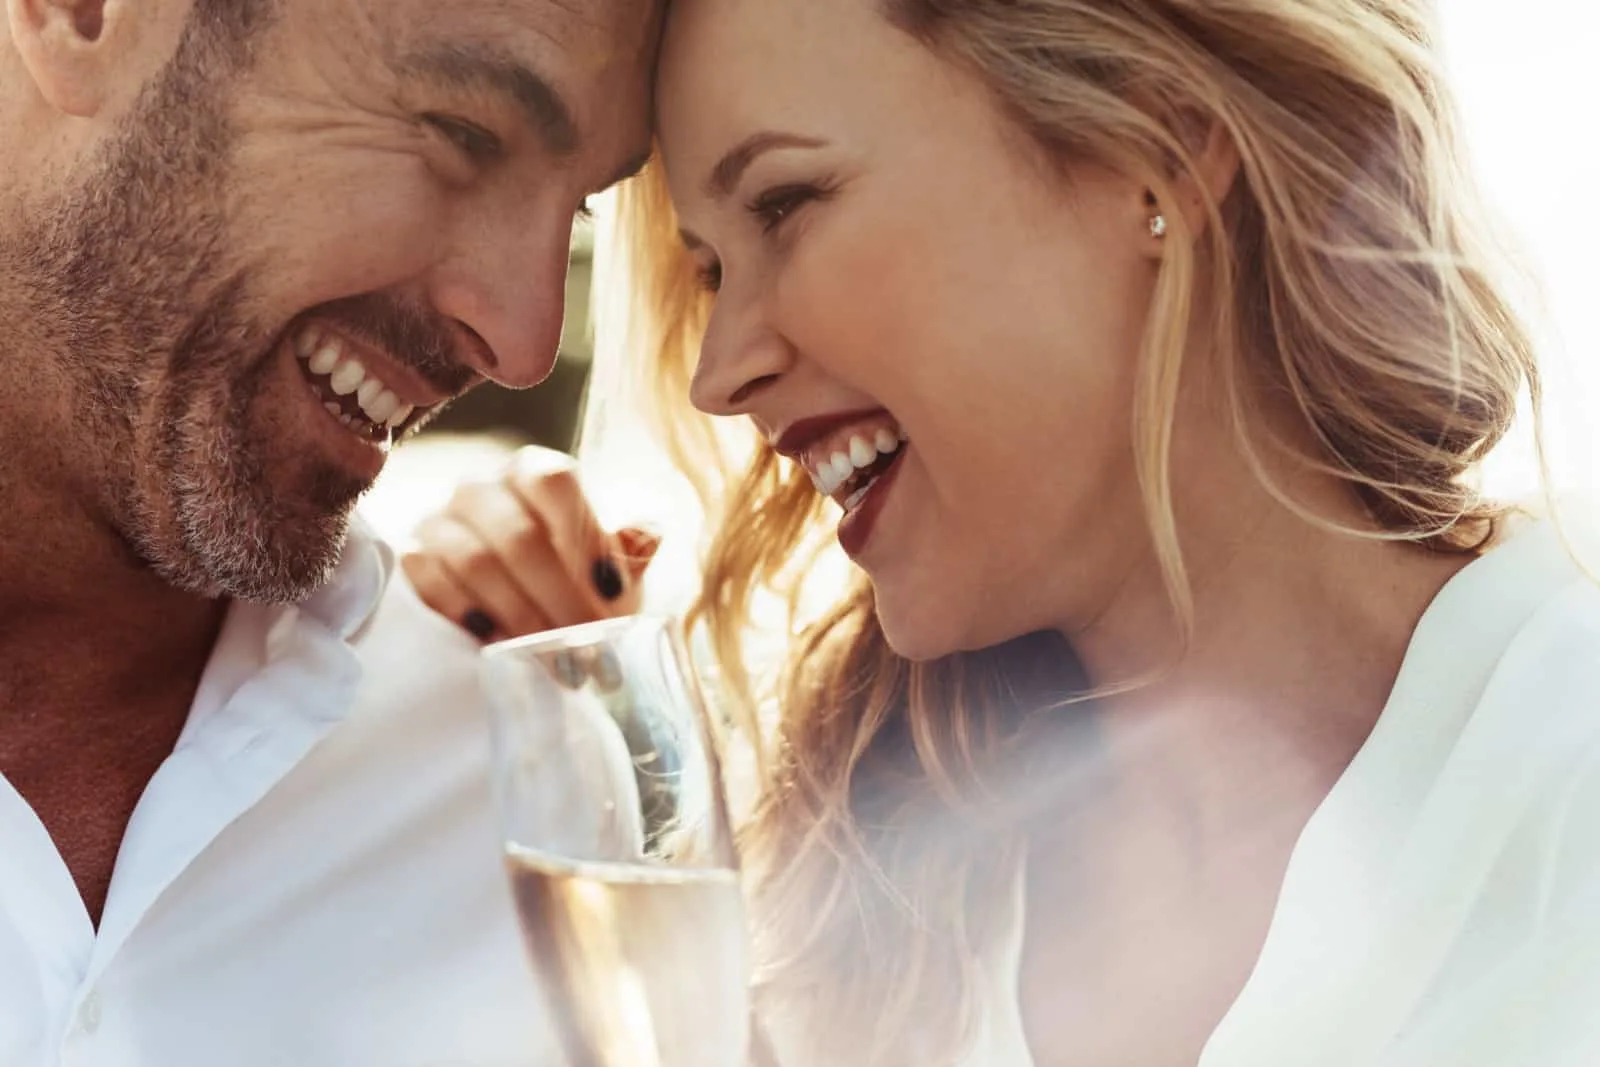 100 Funny Reasons Why I Love You To Make A Loved One Laugh